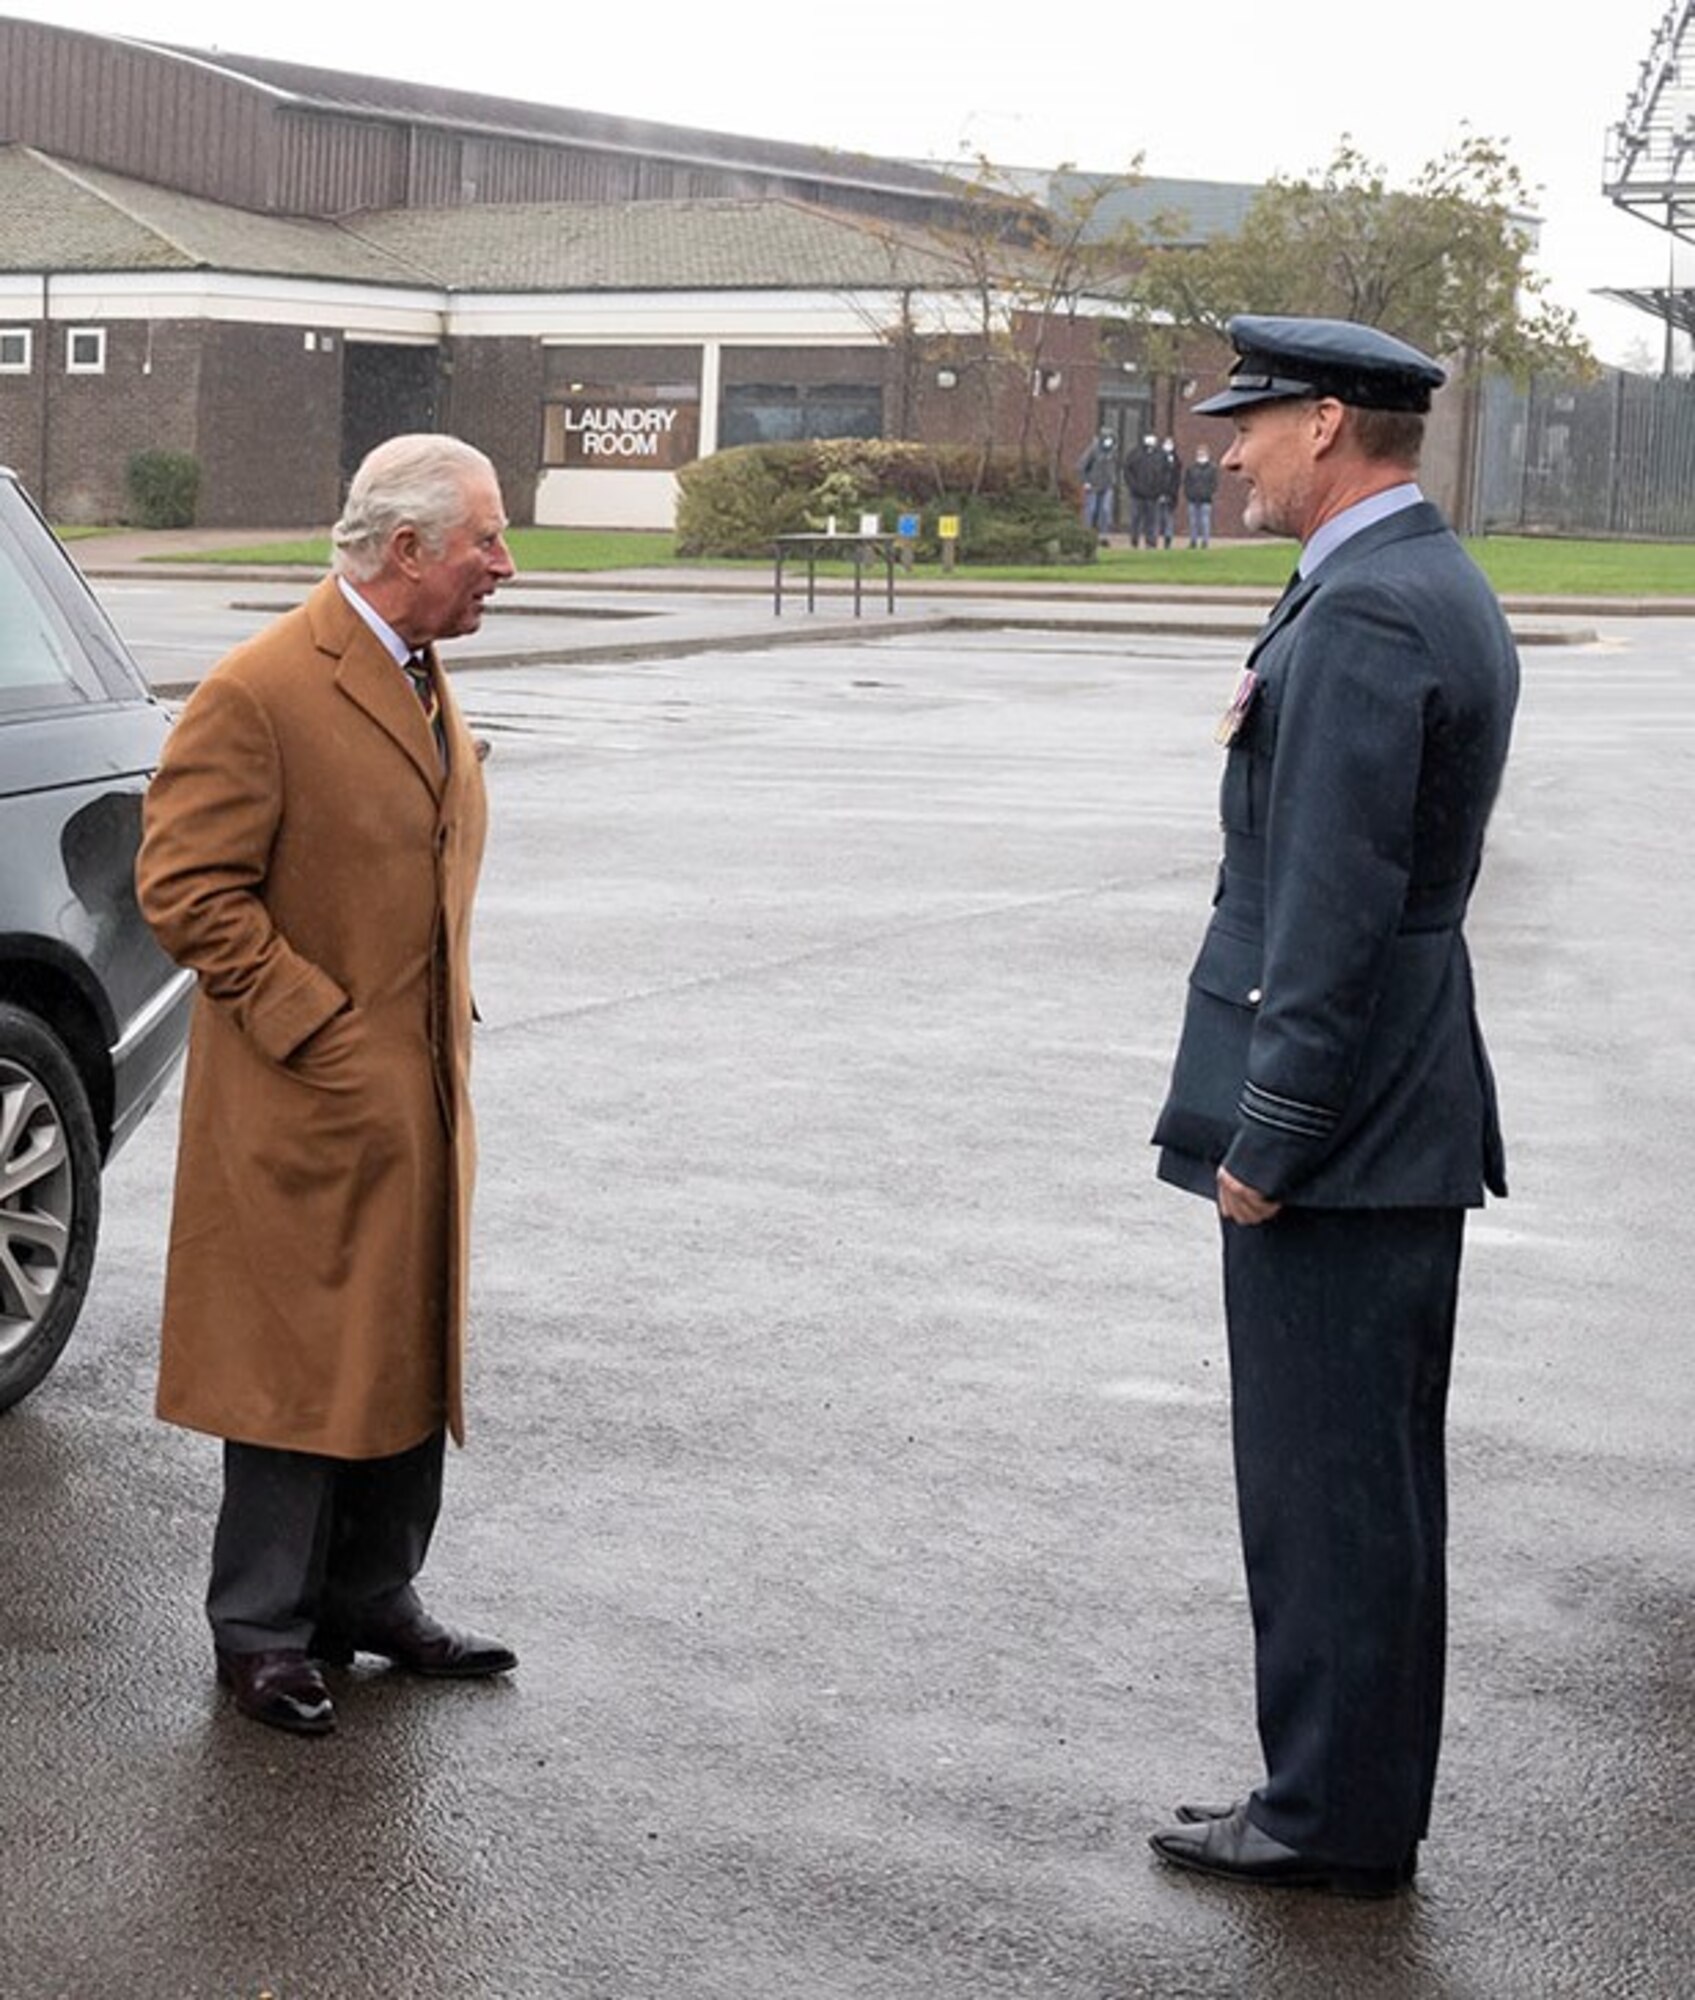 His Royal Highness, left, the Prince of Wales, visits RAF Menwith Hill, England, Oct. 12, 2020. (Courtesy Photo)